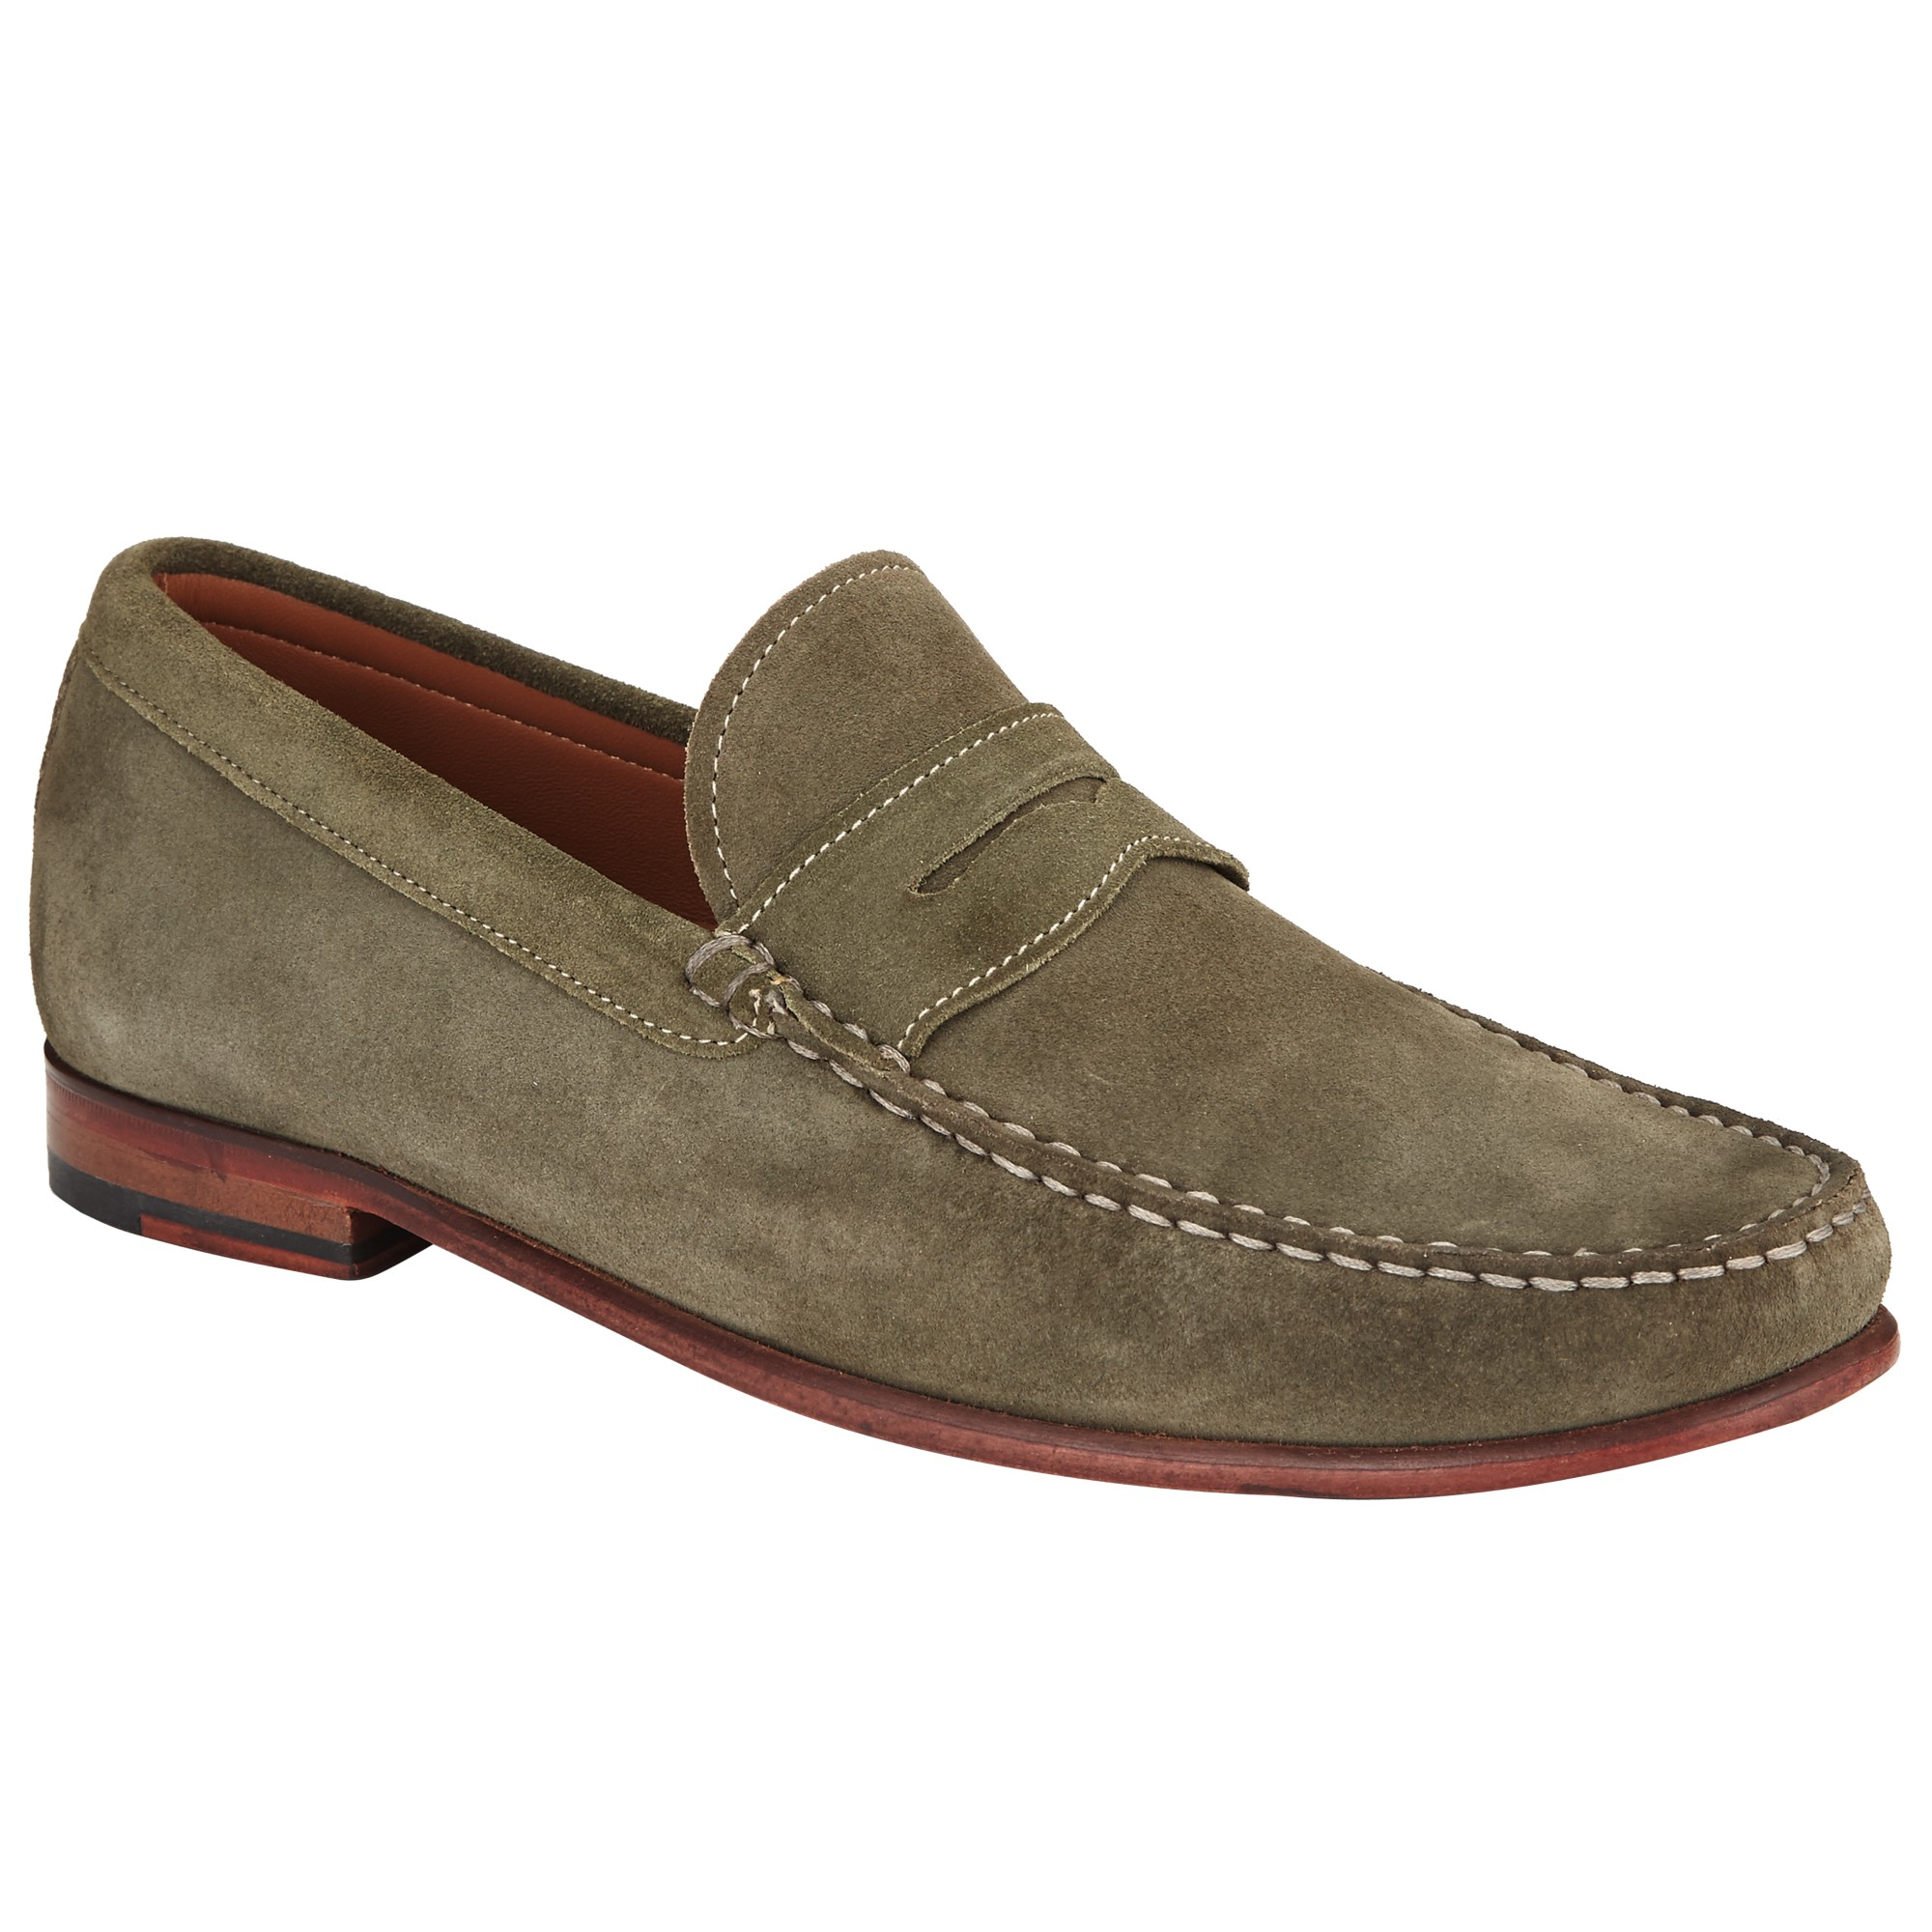 John Lewis Lloyd Suede Penny Loafers for Men - Lyst